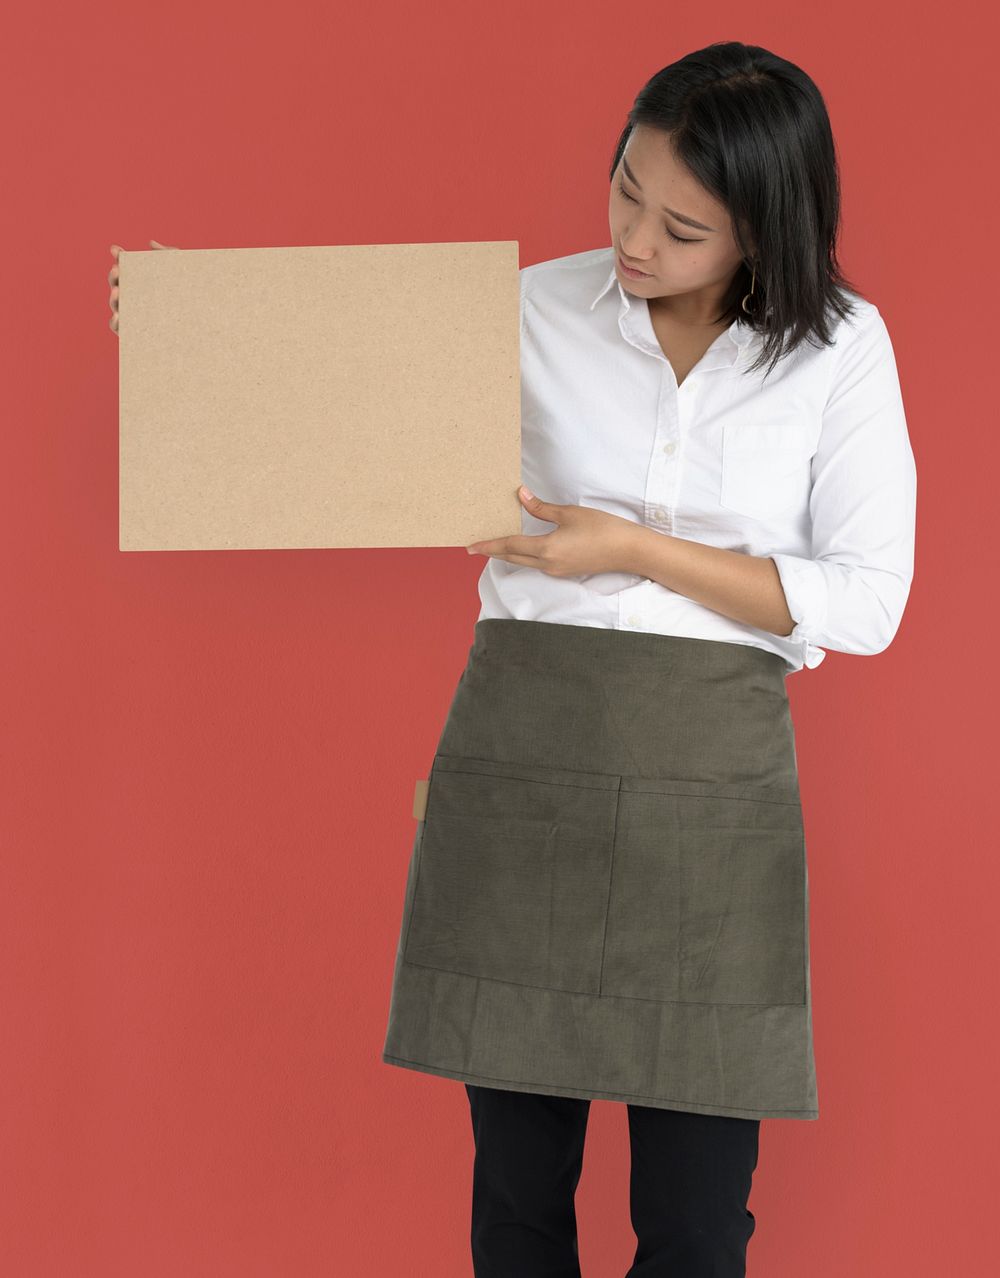 Woman Holding Cork Board Copy Space Concept